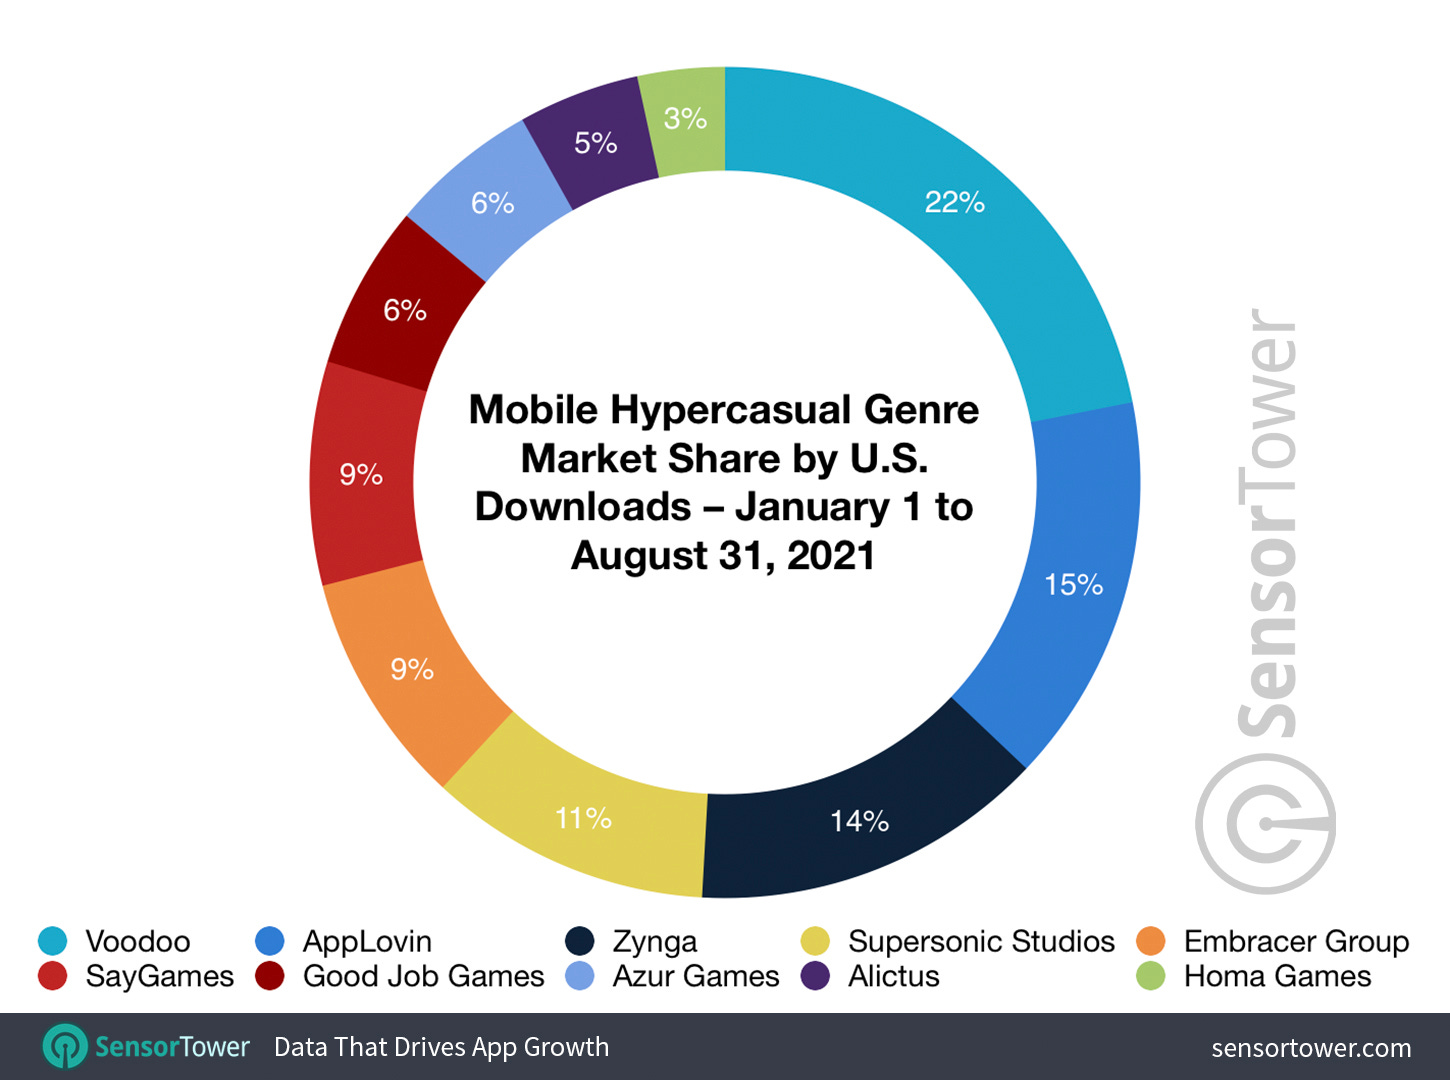 Mobile Hypercasual Genre Market Share by U.S. Downloads – January 1 to August 31, 2021